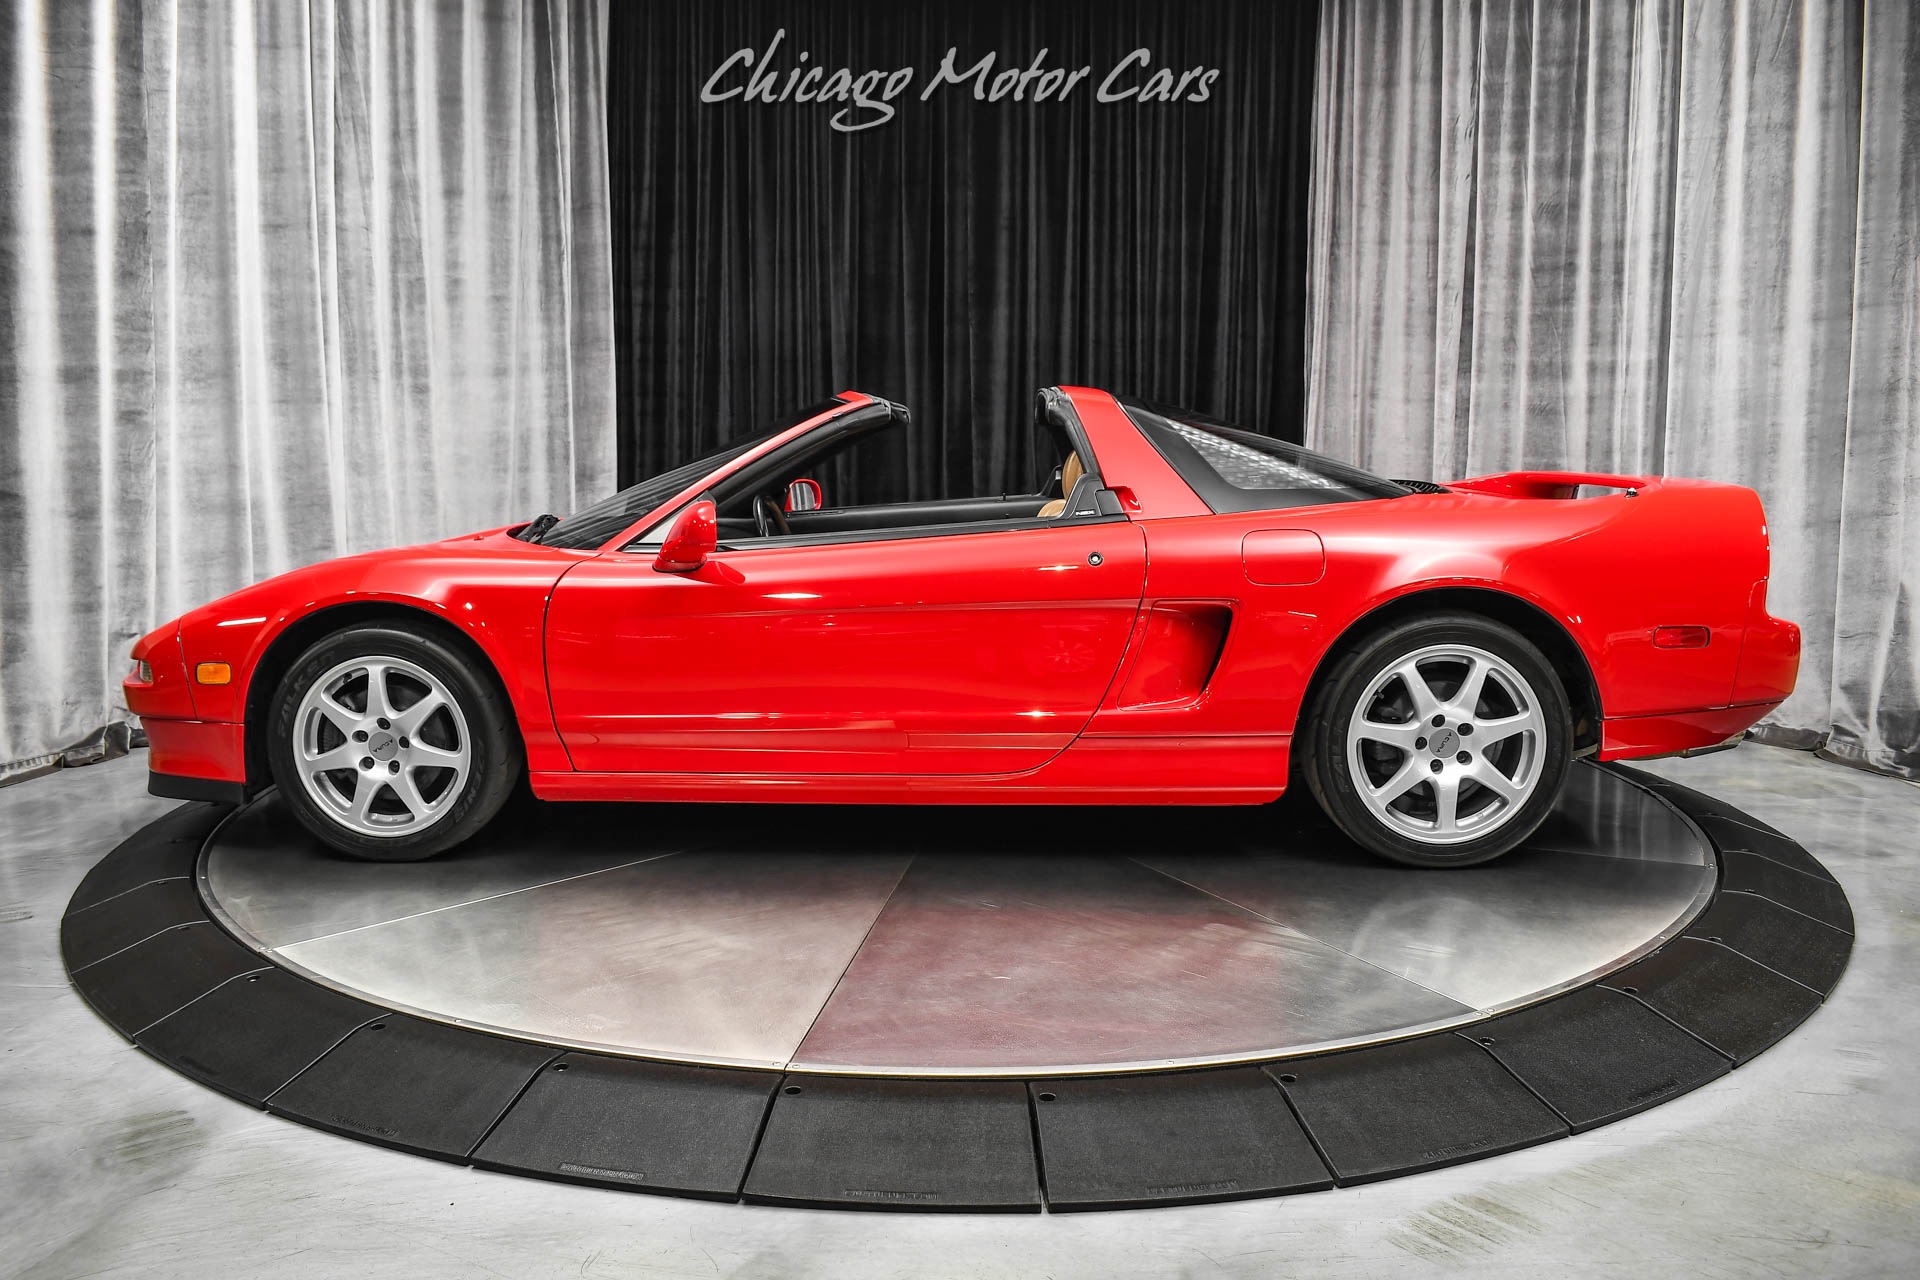 Used 1996 Acura NSX NSX-T 5-Speed Manual! Pristine Shape! Tons of 